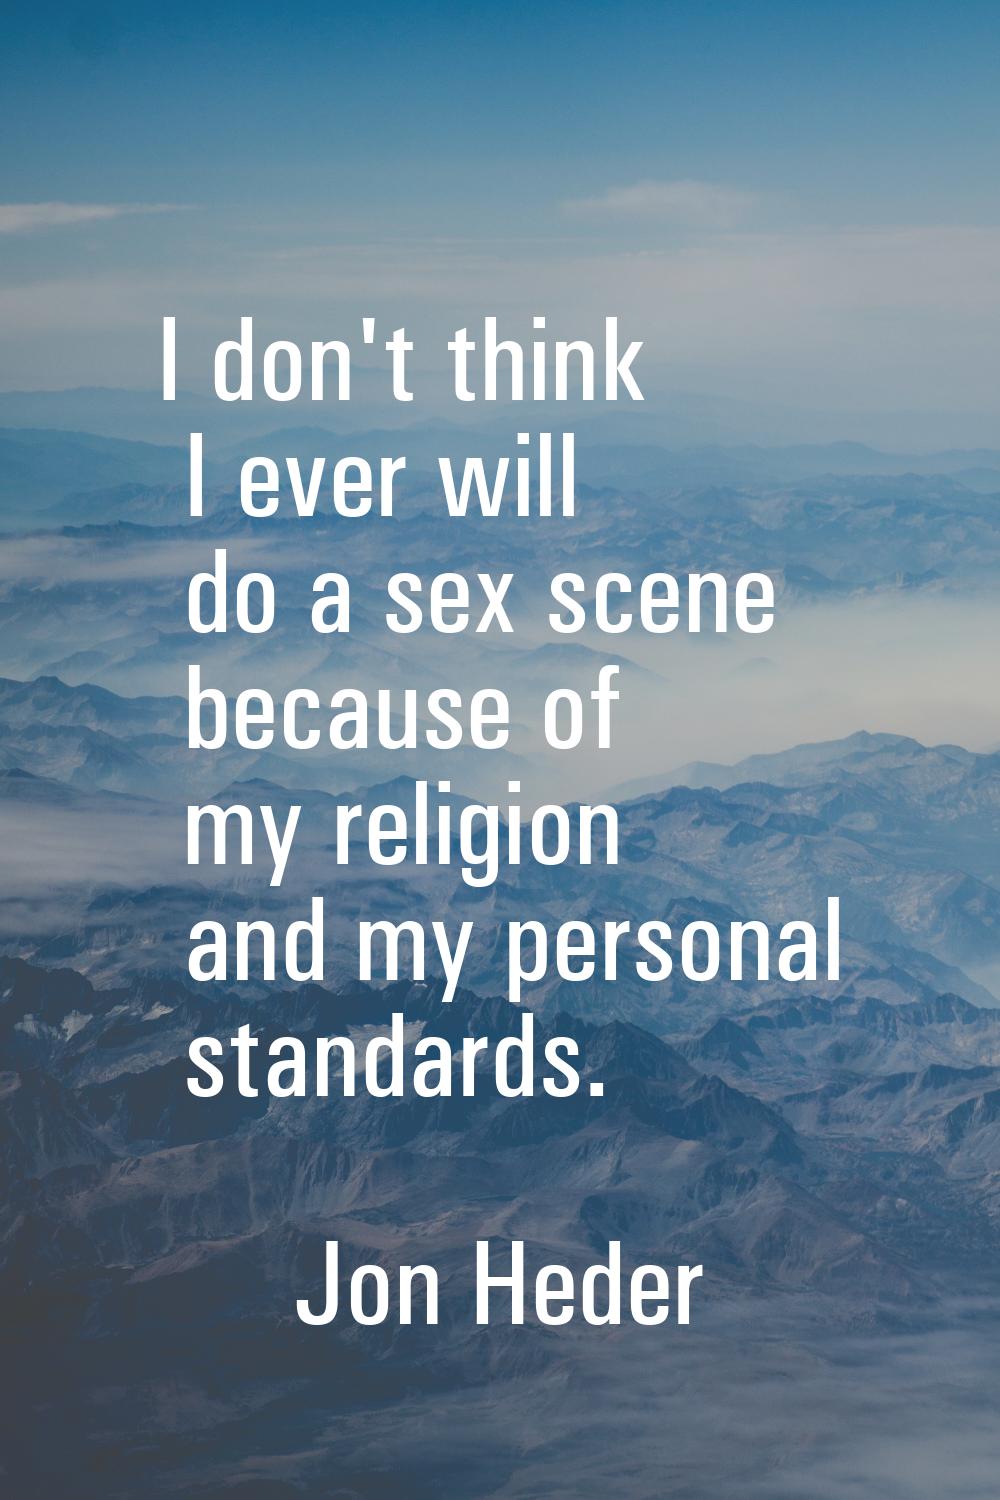 I don't think I ever will do a sex scene because of my religion and my personal standards.